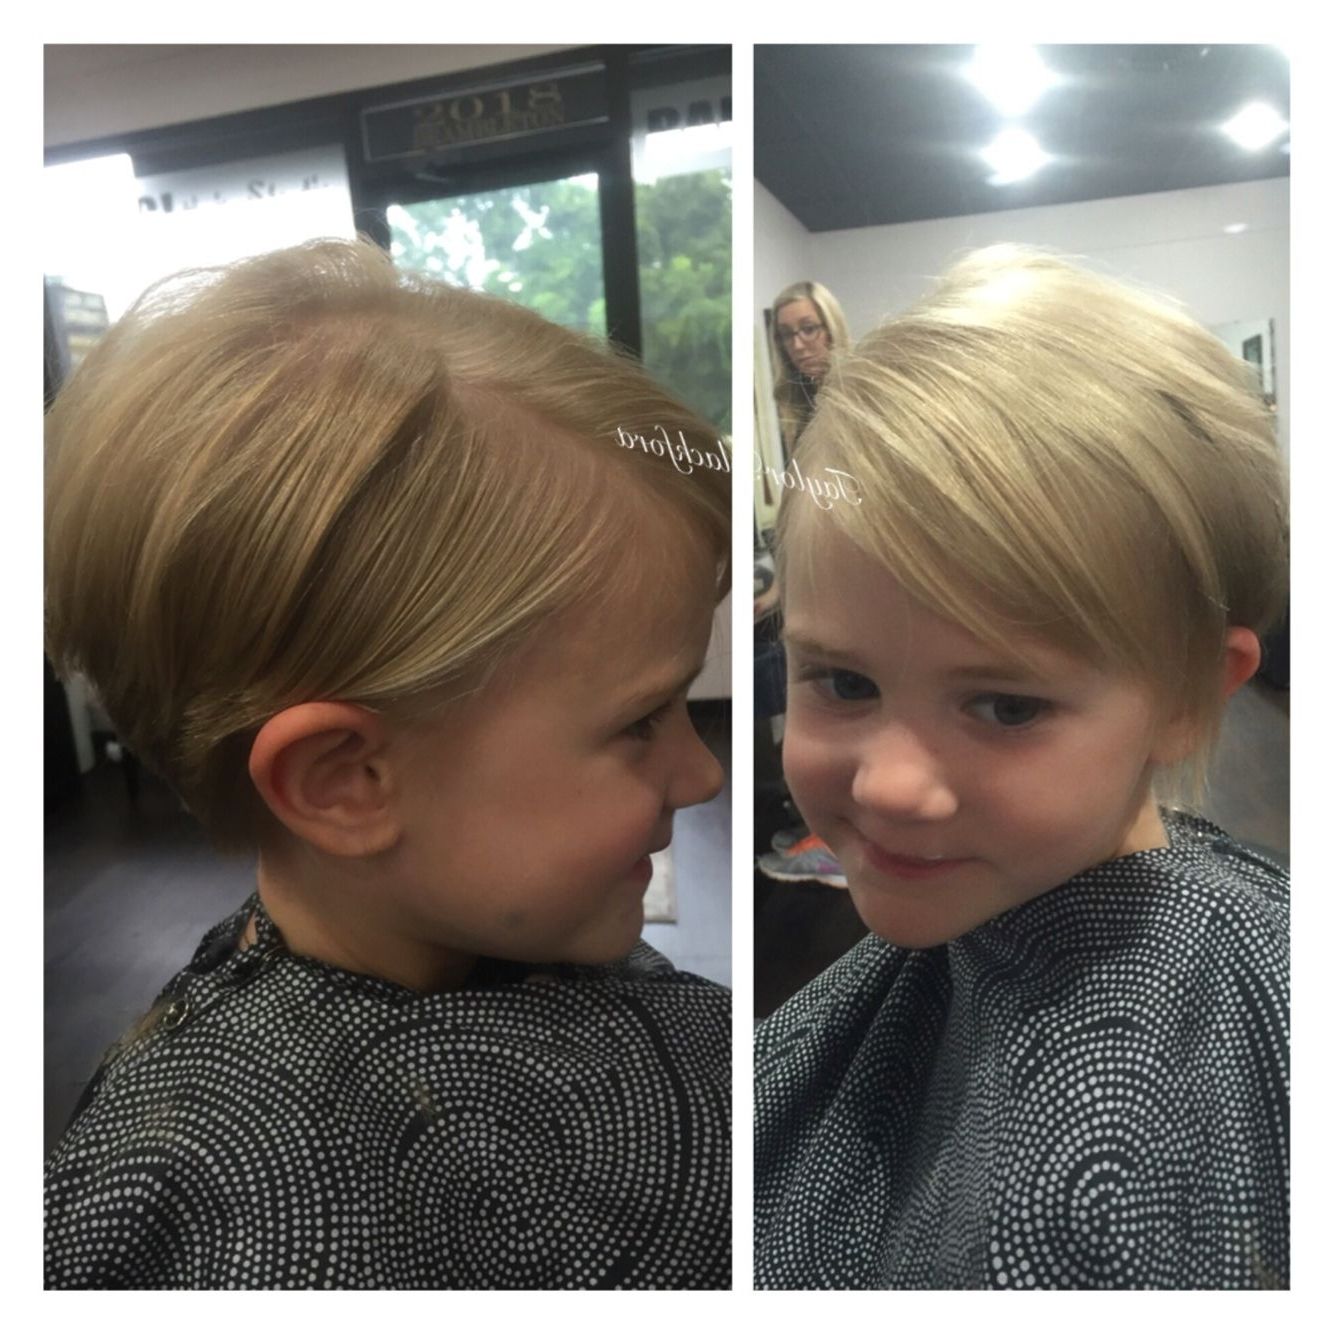 Precious Pixie Cut On This Little Girl! Perfect Haircut For Fine Pertaining To Current Short Bob Pixie Hairstyles (View 9 of 15)